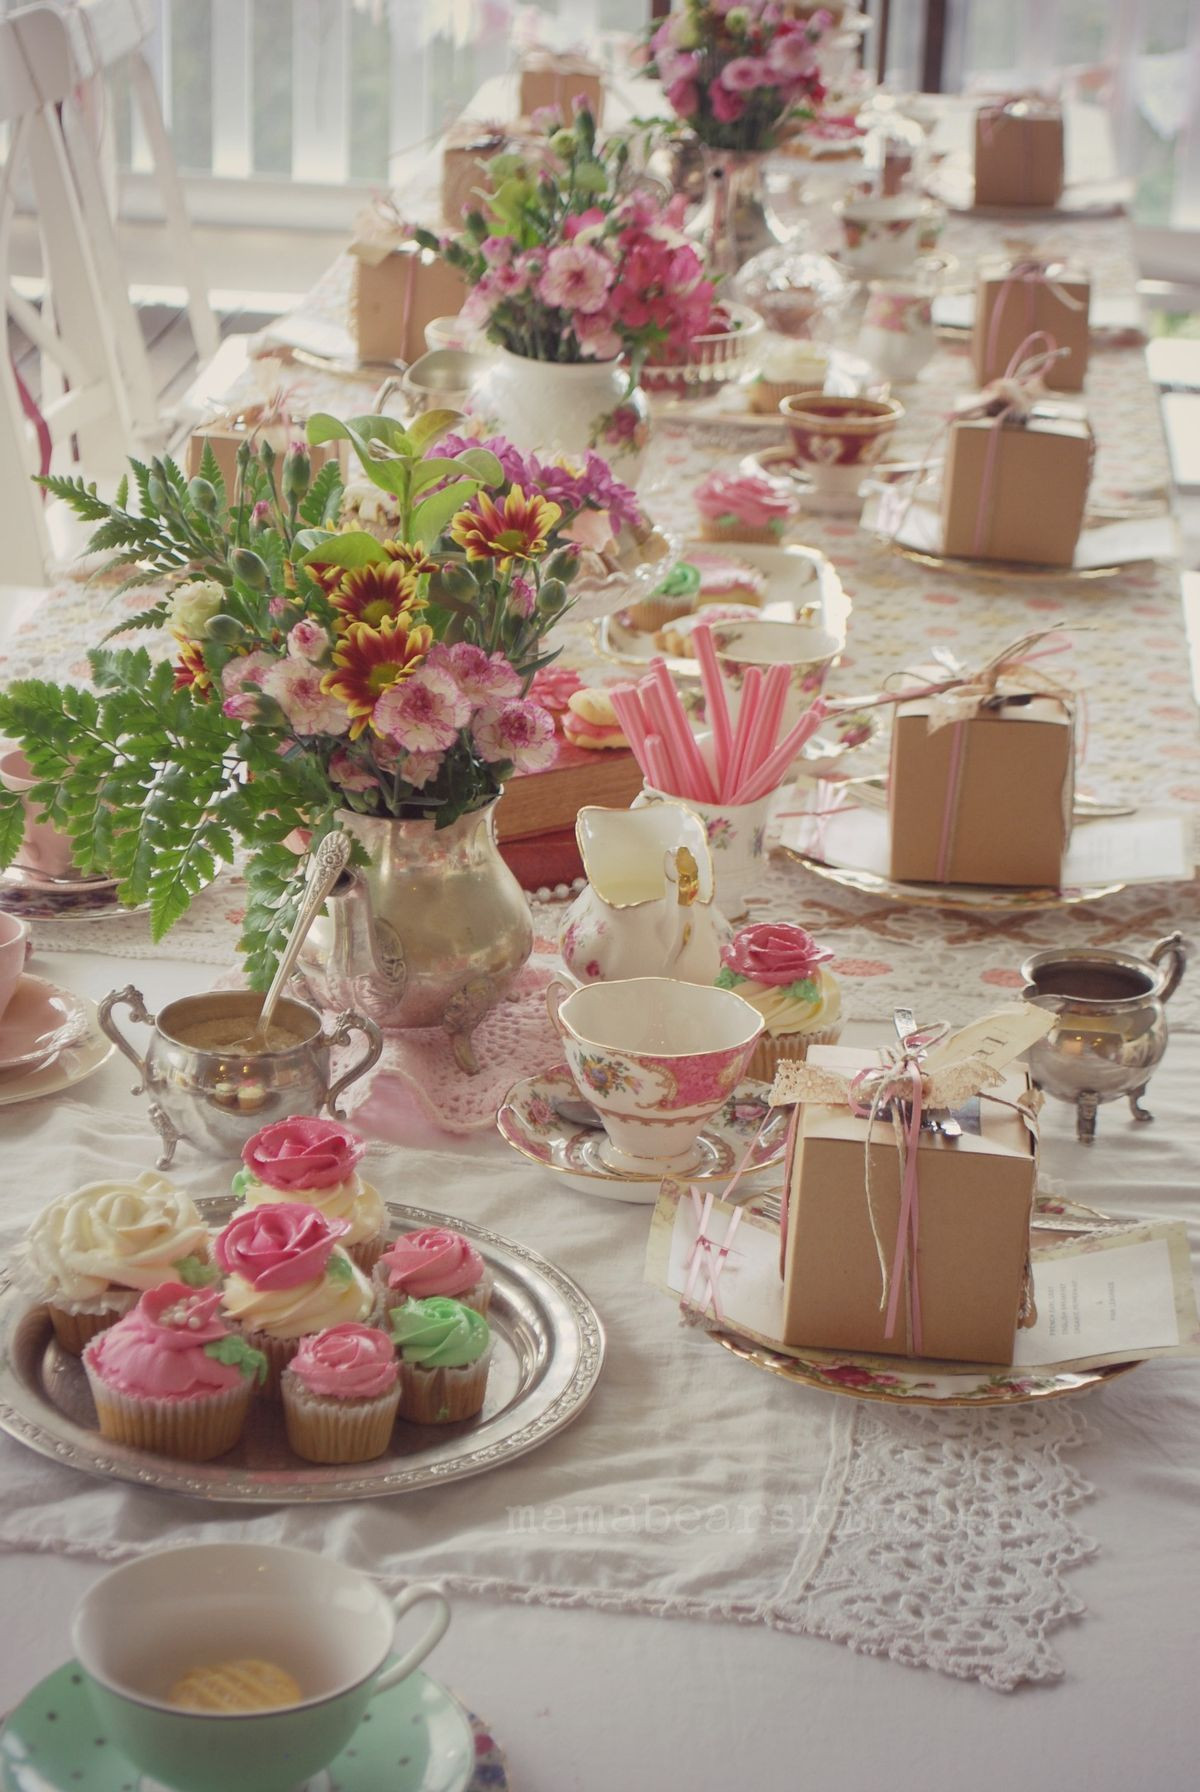 Tea Party At Home Ideas
 Pin by Joy Ray on Tablescape in 2019